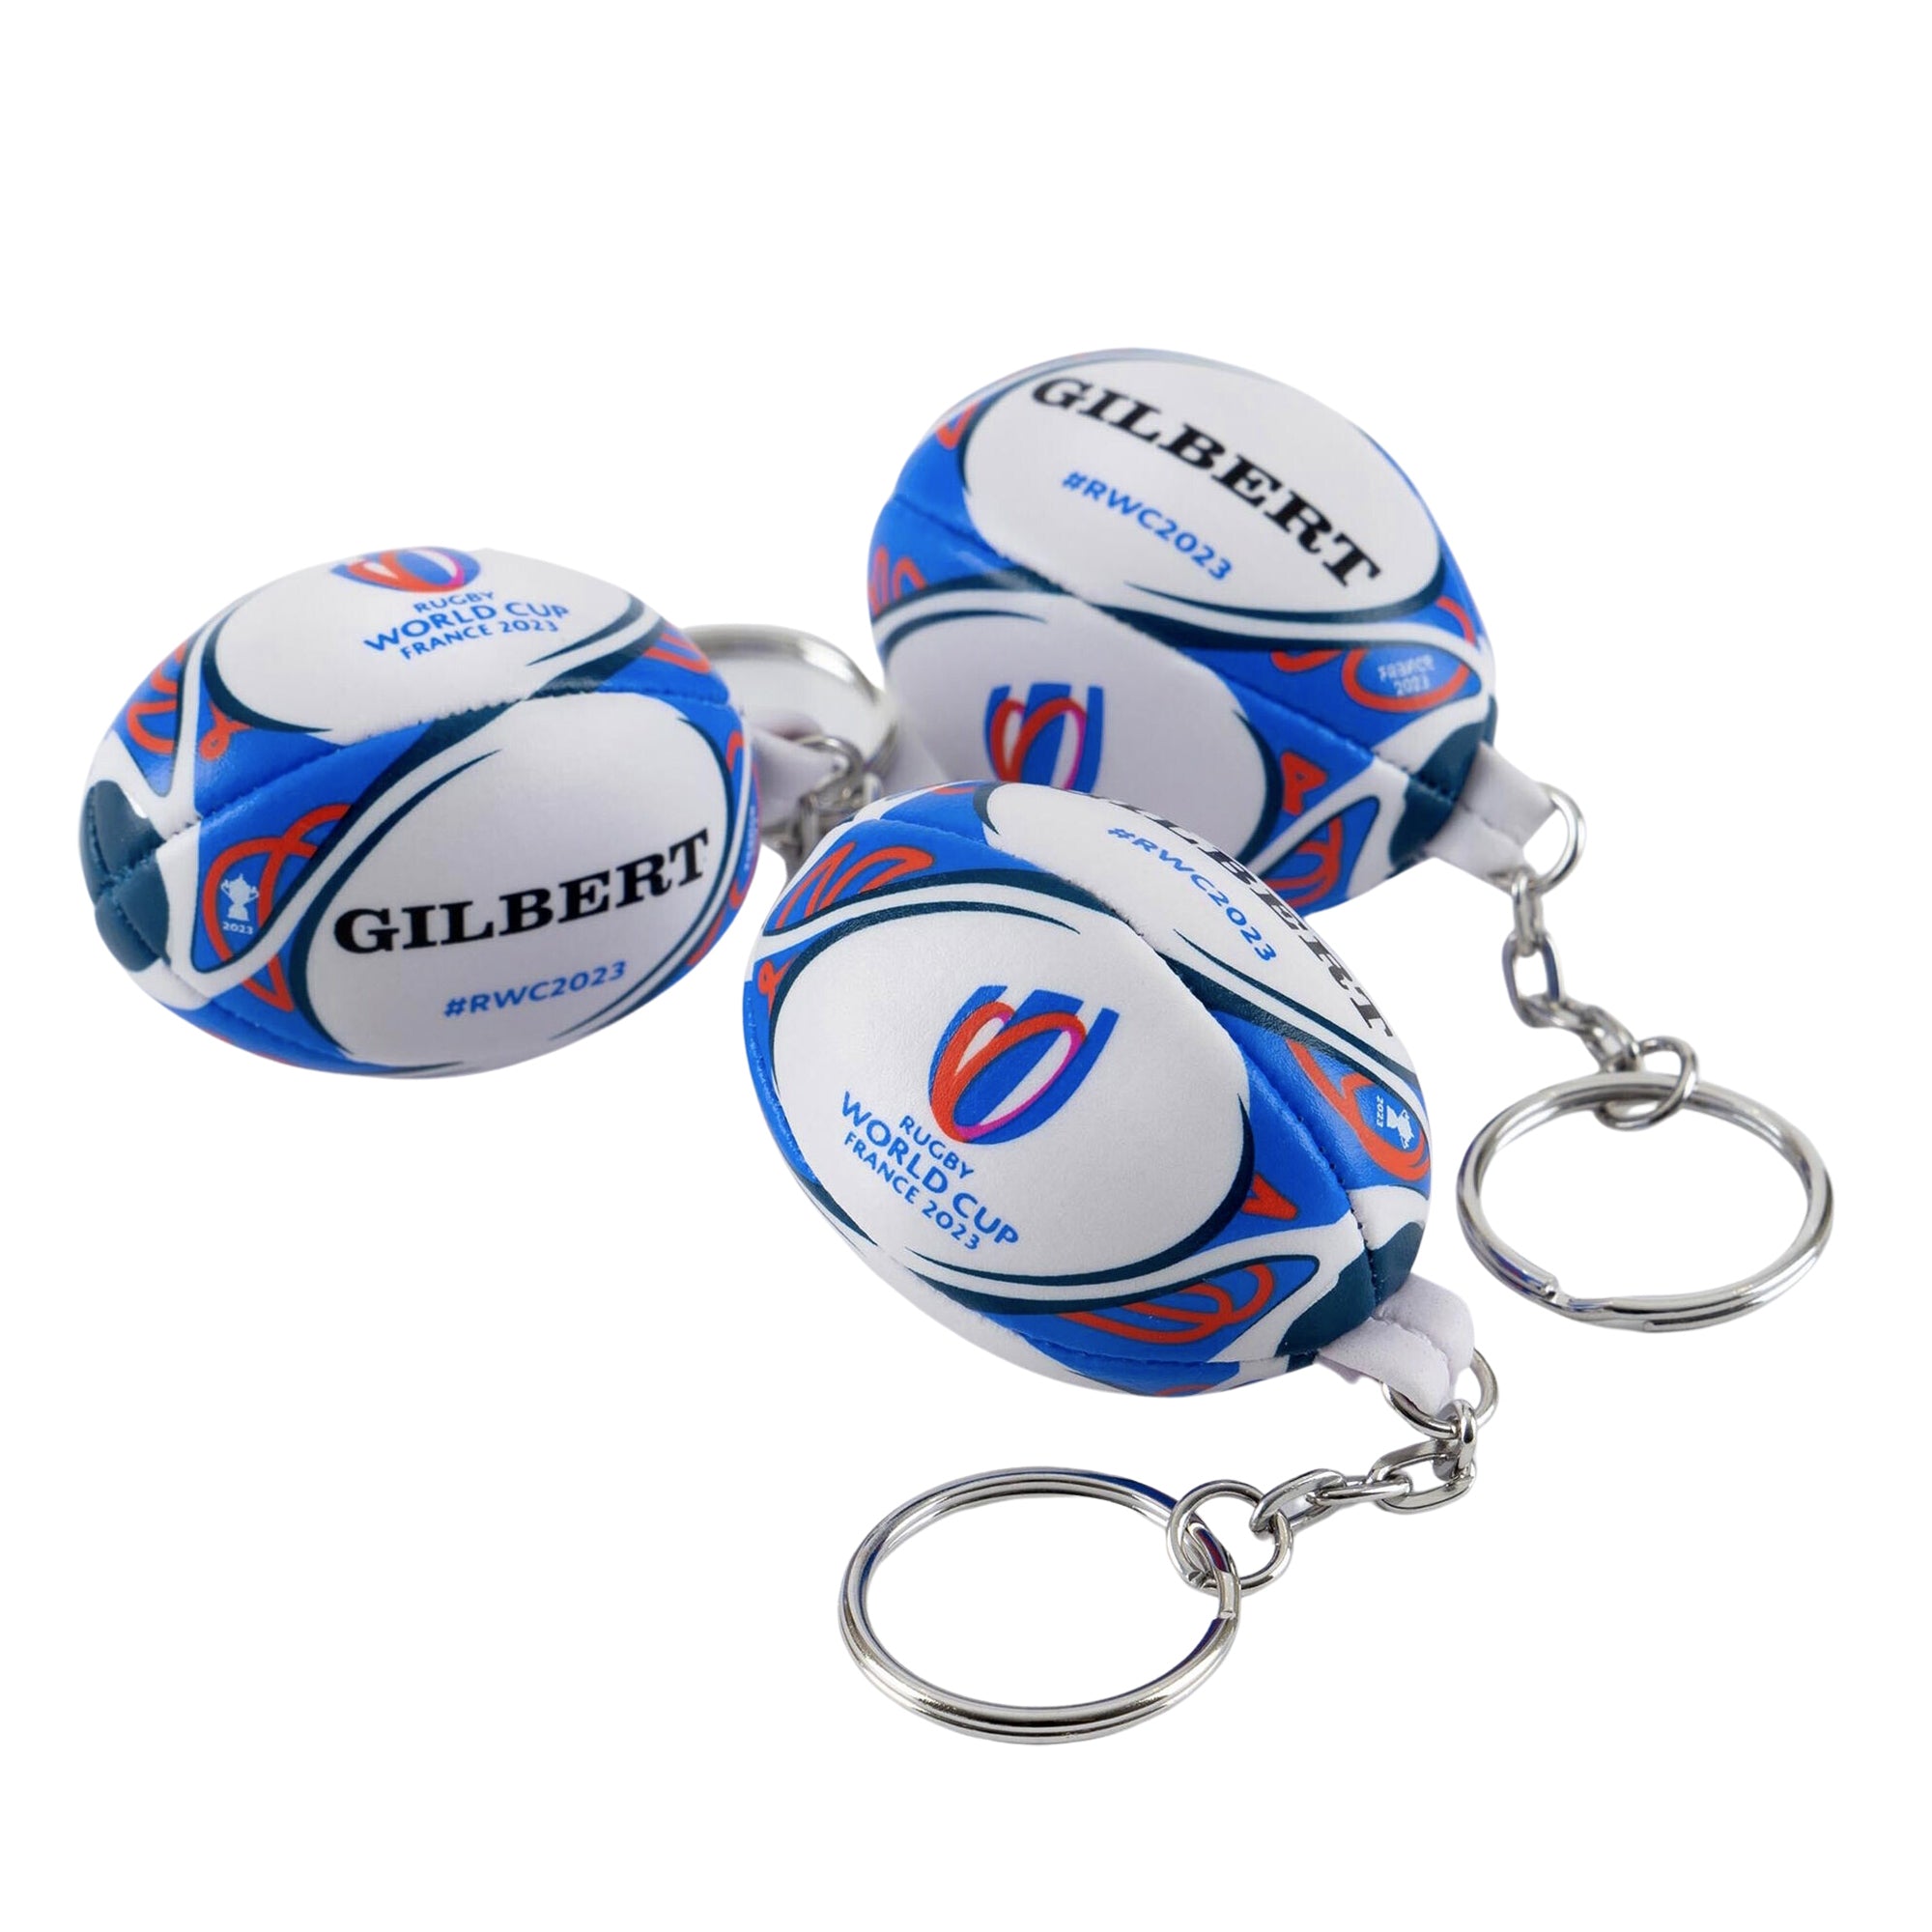 World　Imports　Keyring　Rugby　Cup　Rugby　Gilbert　2023